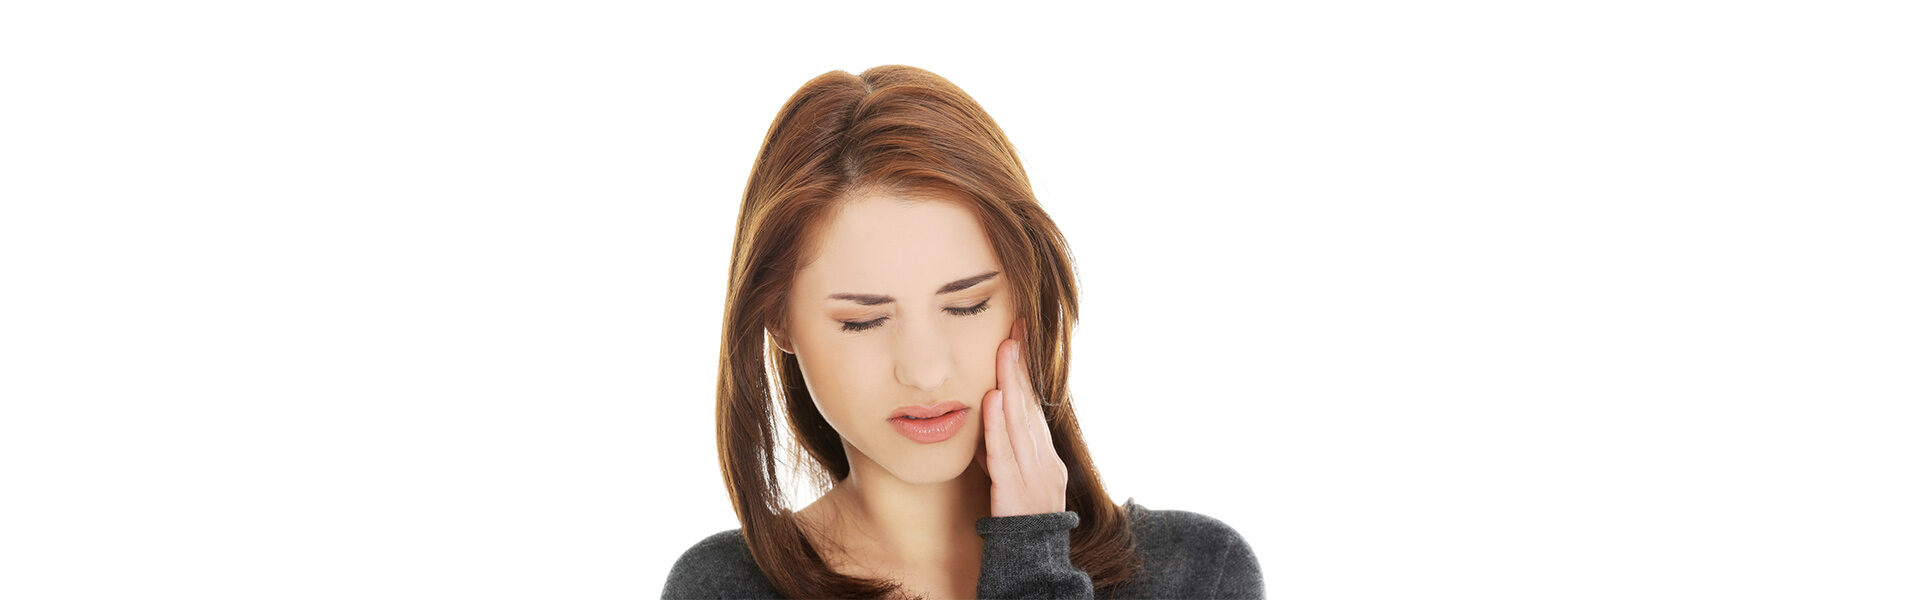 TMJ/TMD Treatment in Toronto, ON